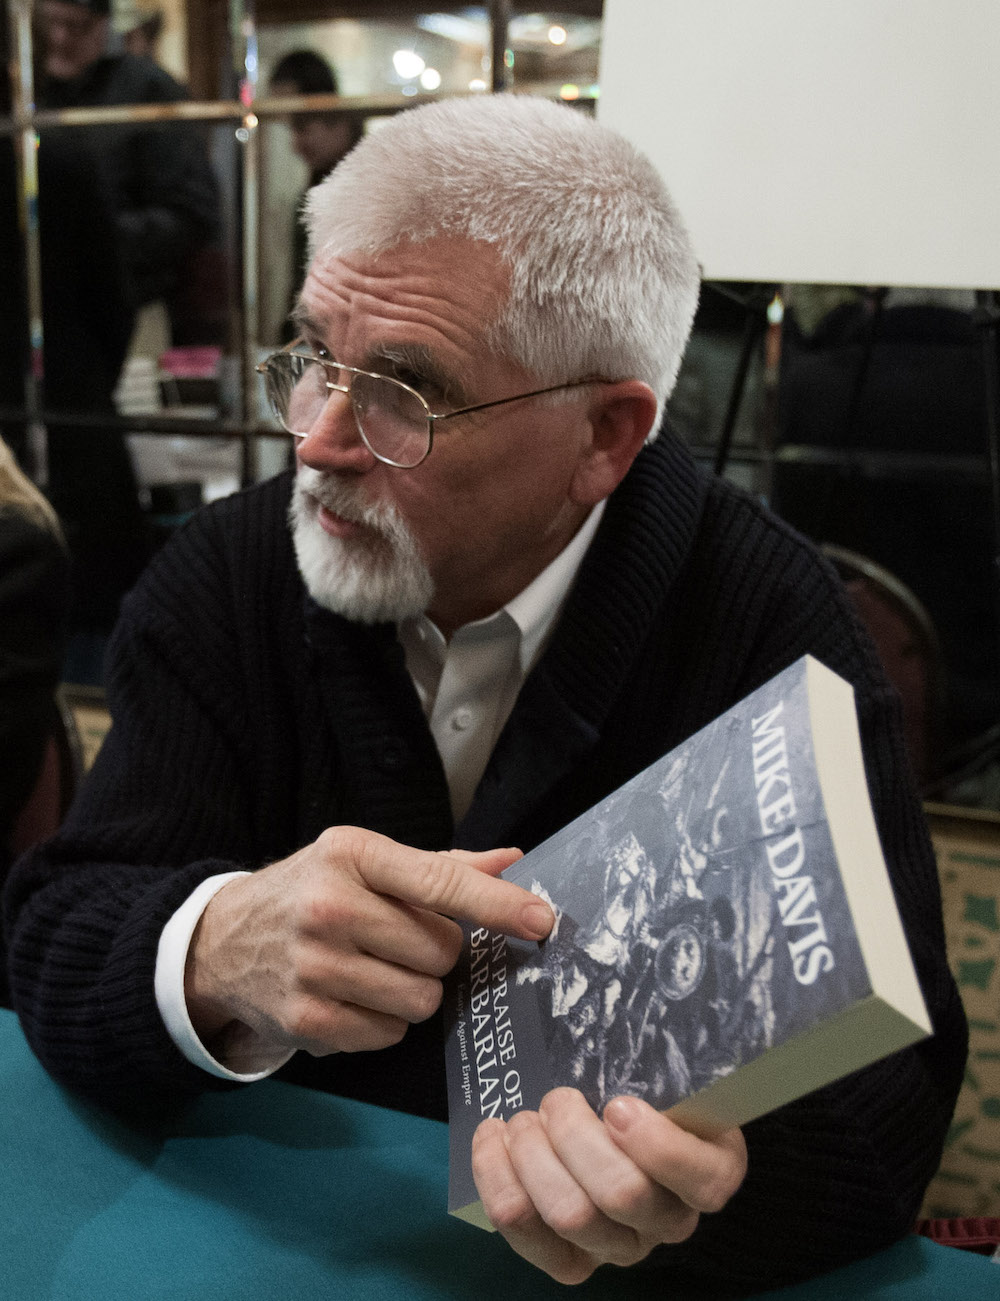 Author Mike Davis, a white man with white hair, beard, and glasses, holds his book In Praise of Barbarians.